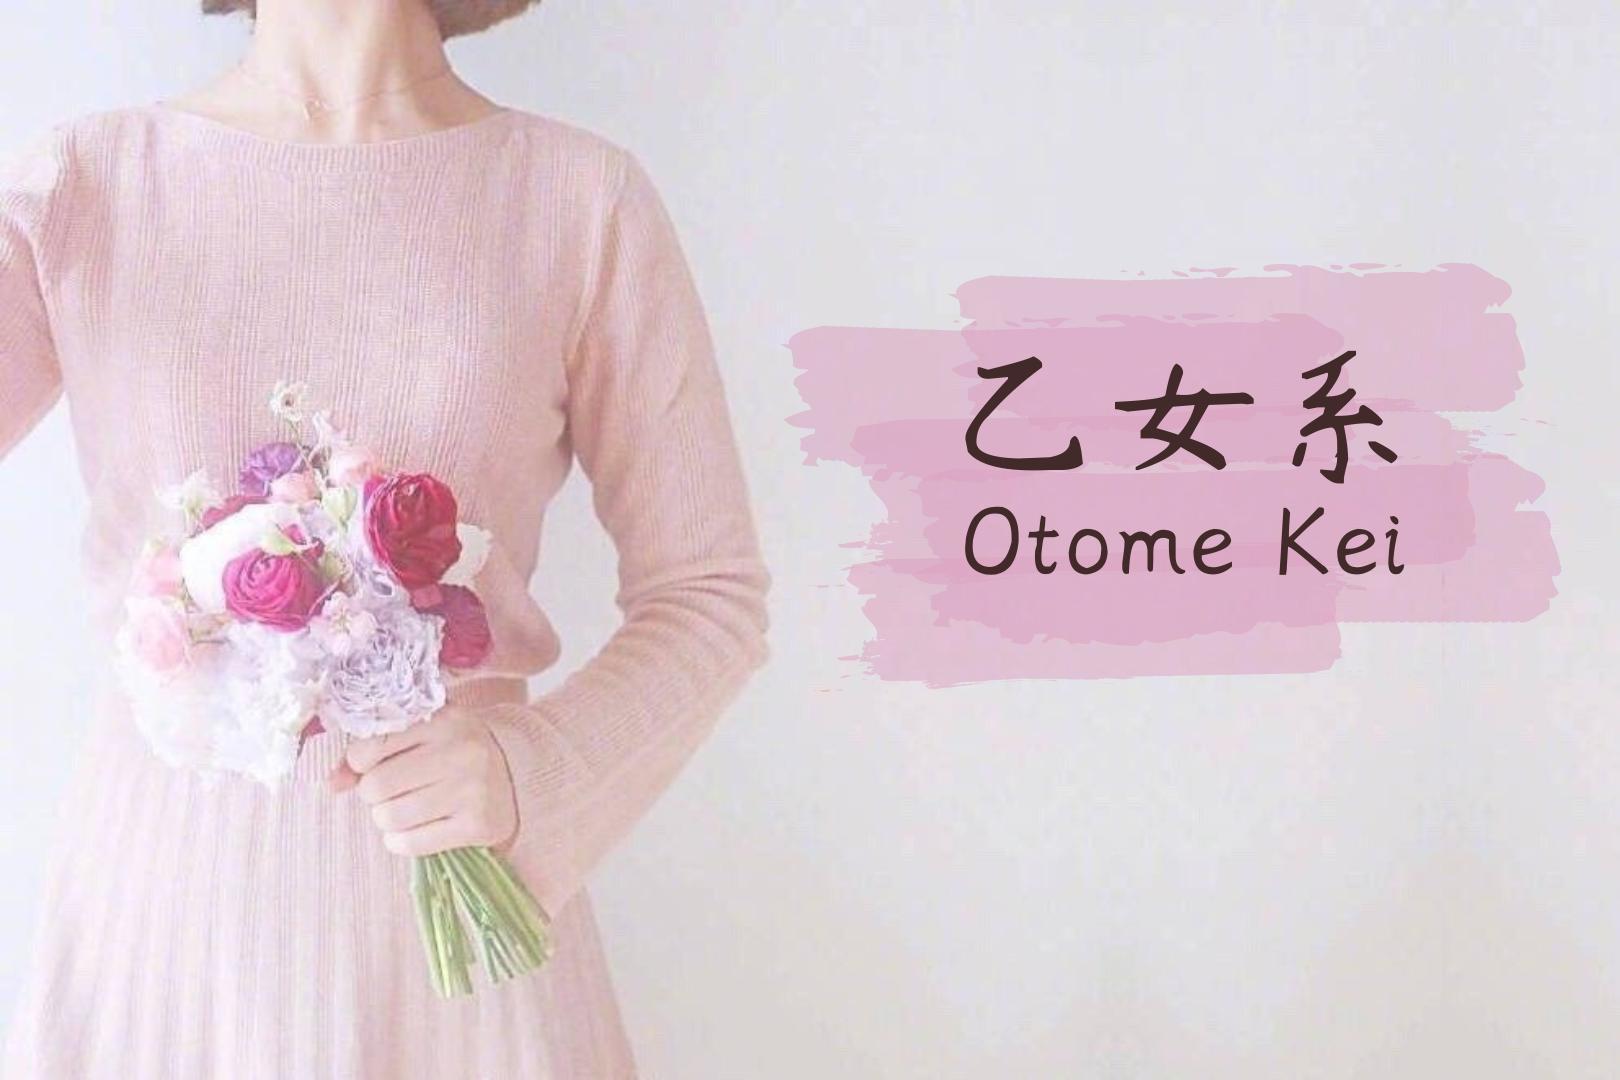 What is Otome Kei?